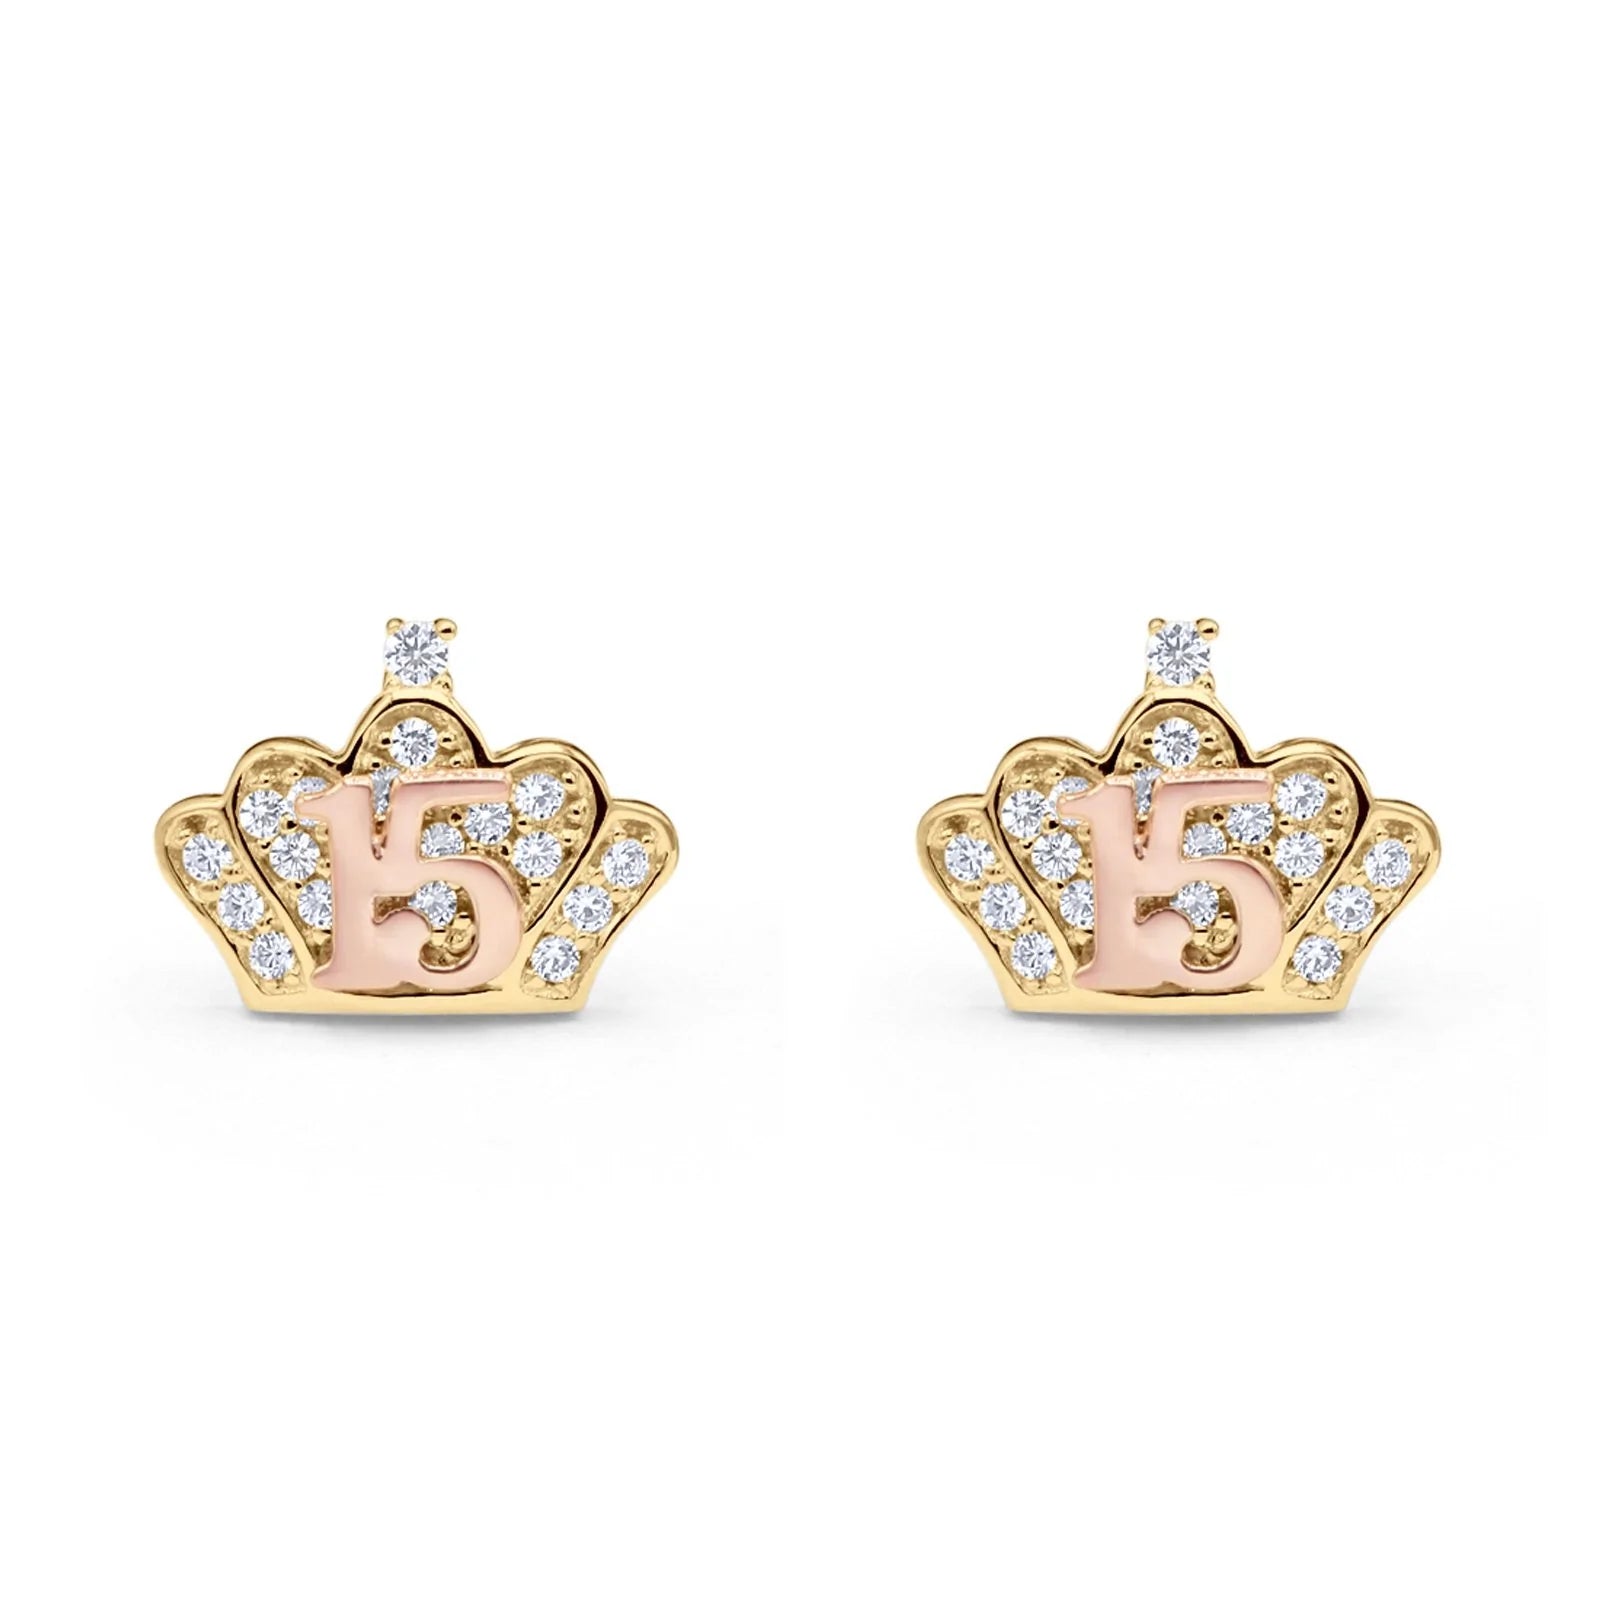 14K Two Tone Gold Solid Micropave Crown Post Tiny Studs Earring Best 15th Birthday Or Anniversary Gift